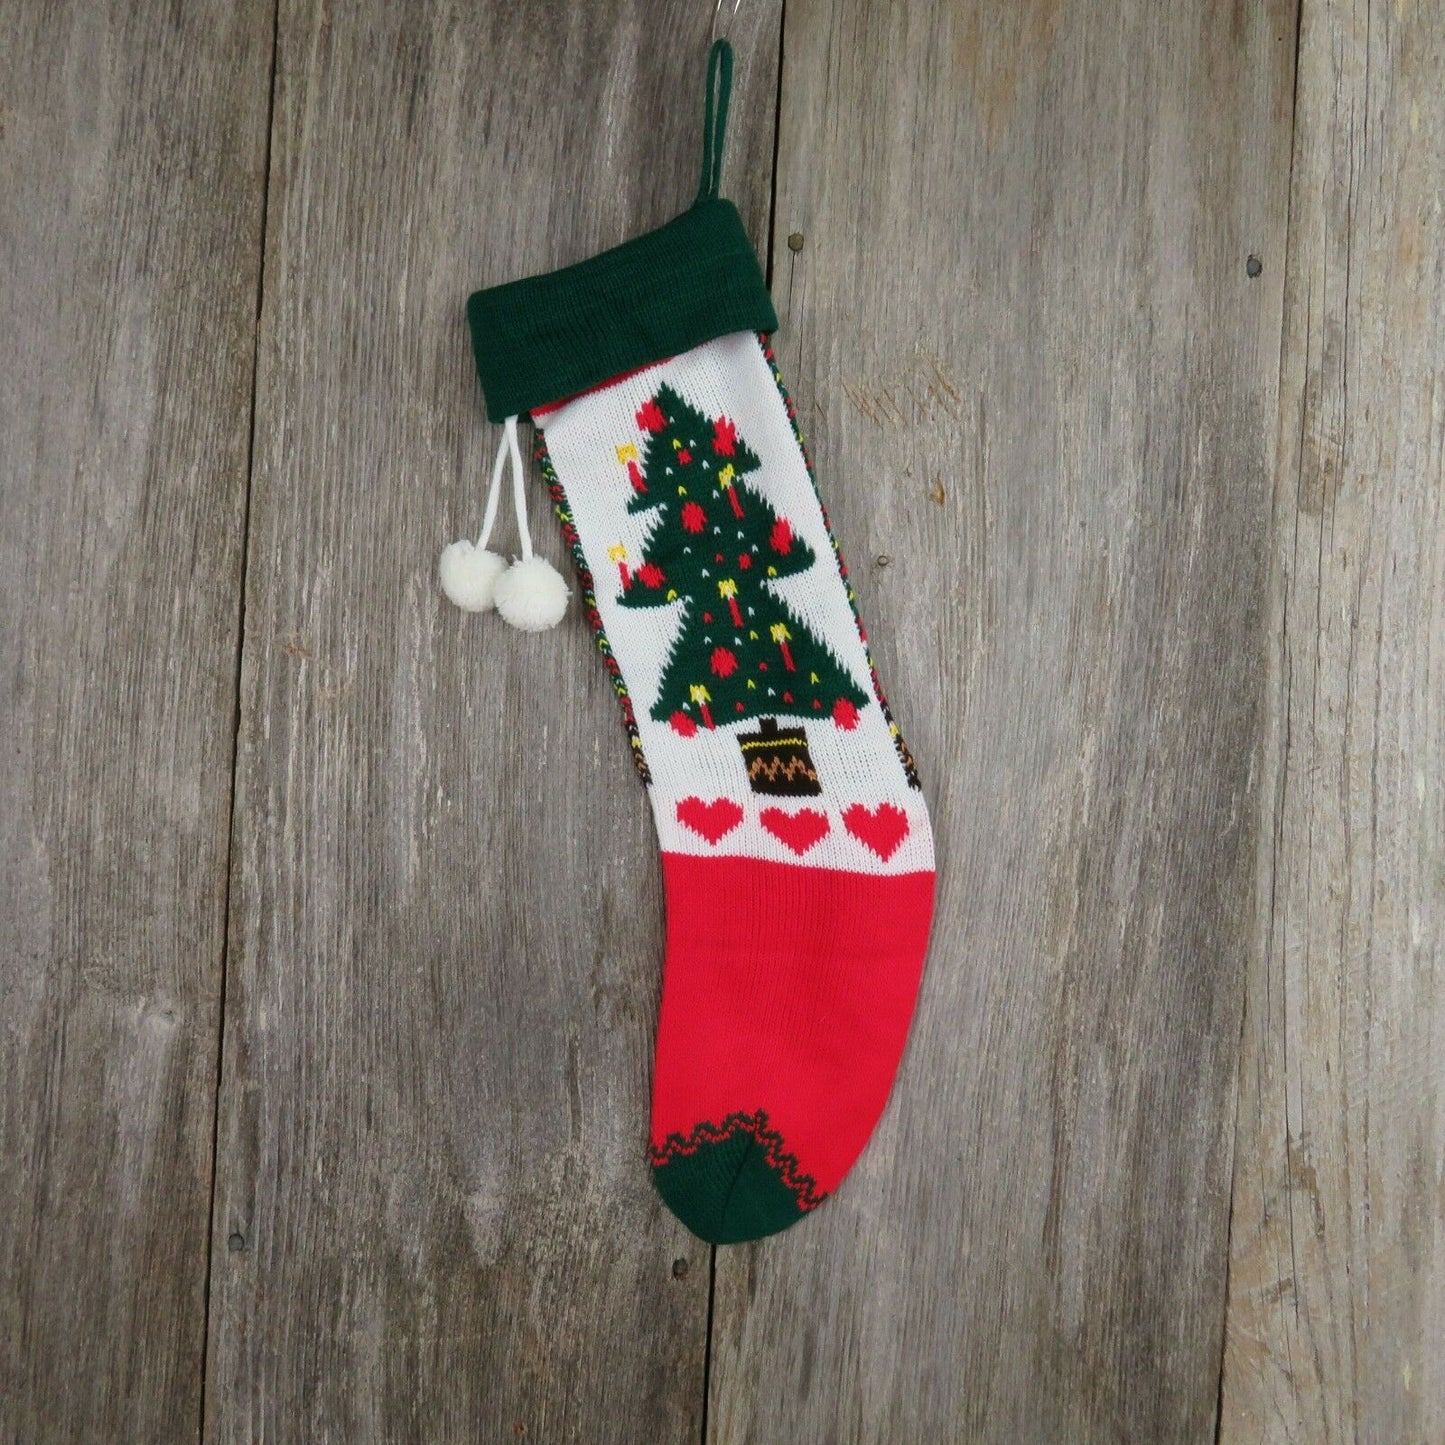 Vintage Christmas Tree Stocking Knitted Knit White Red Green Hearts Candle - At Grandma's Table